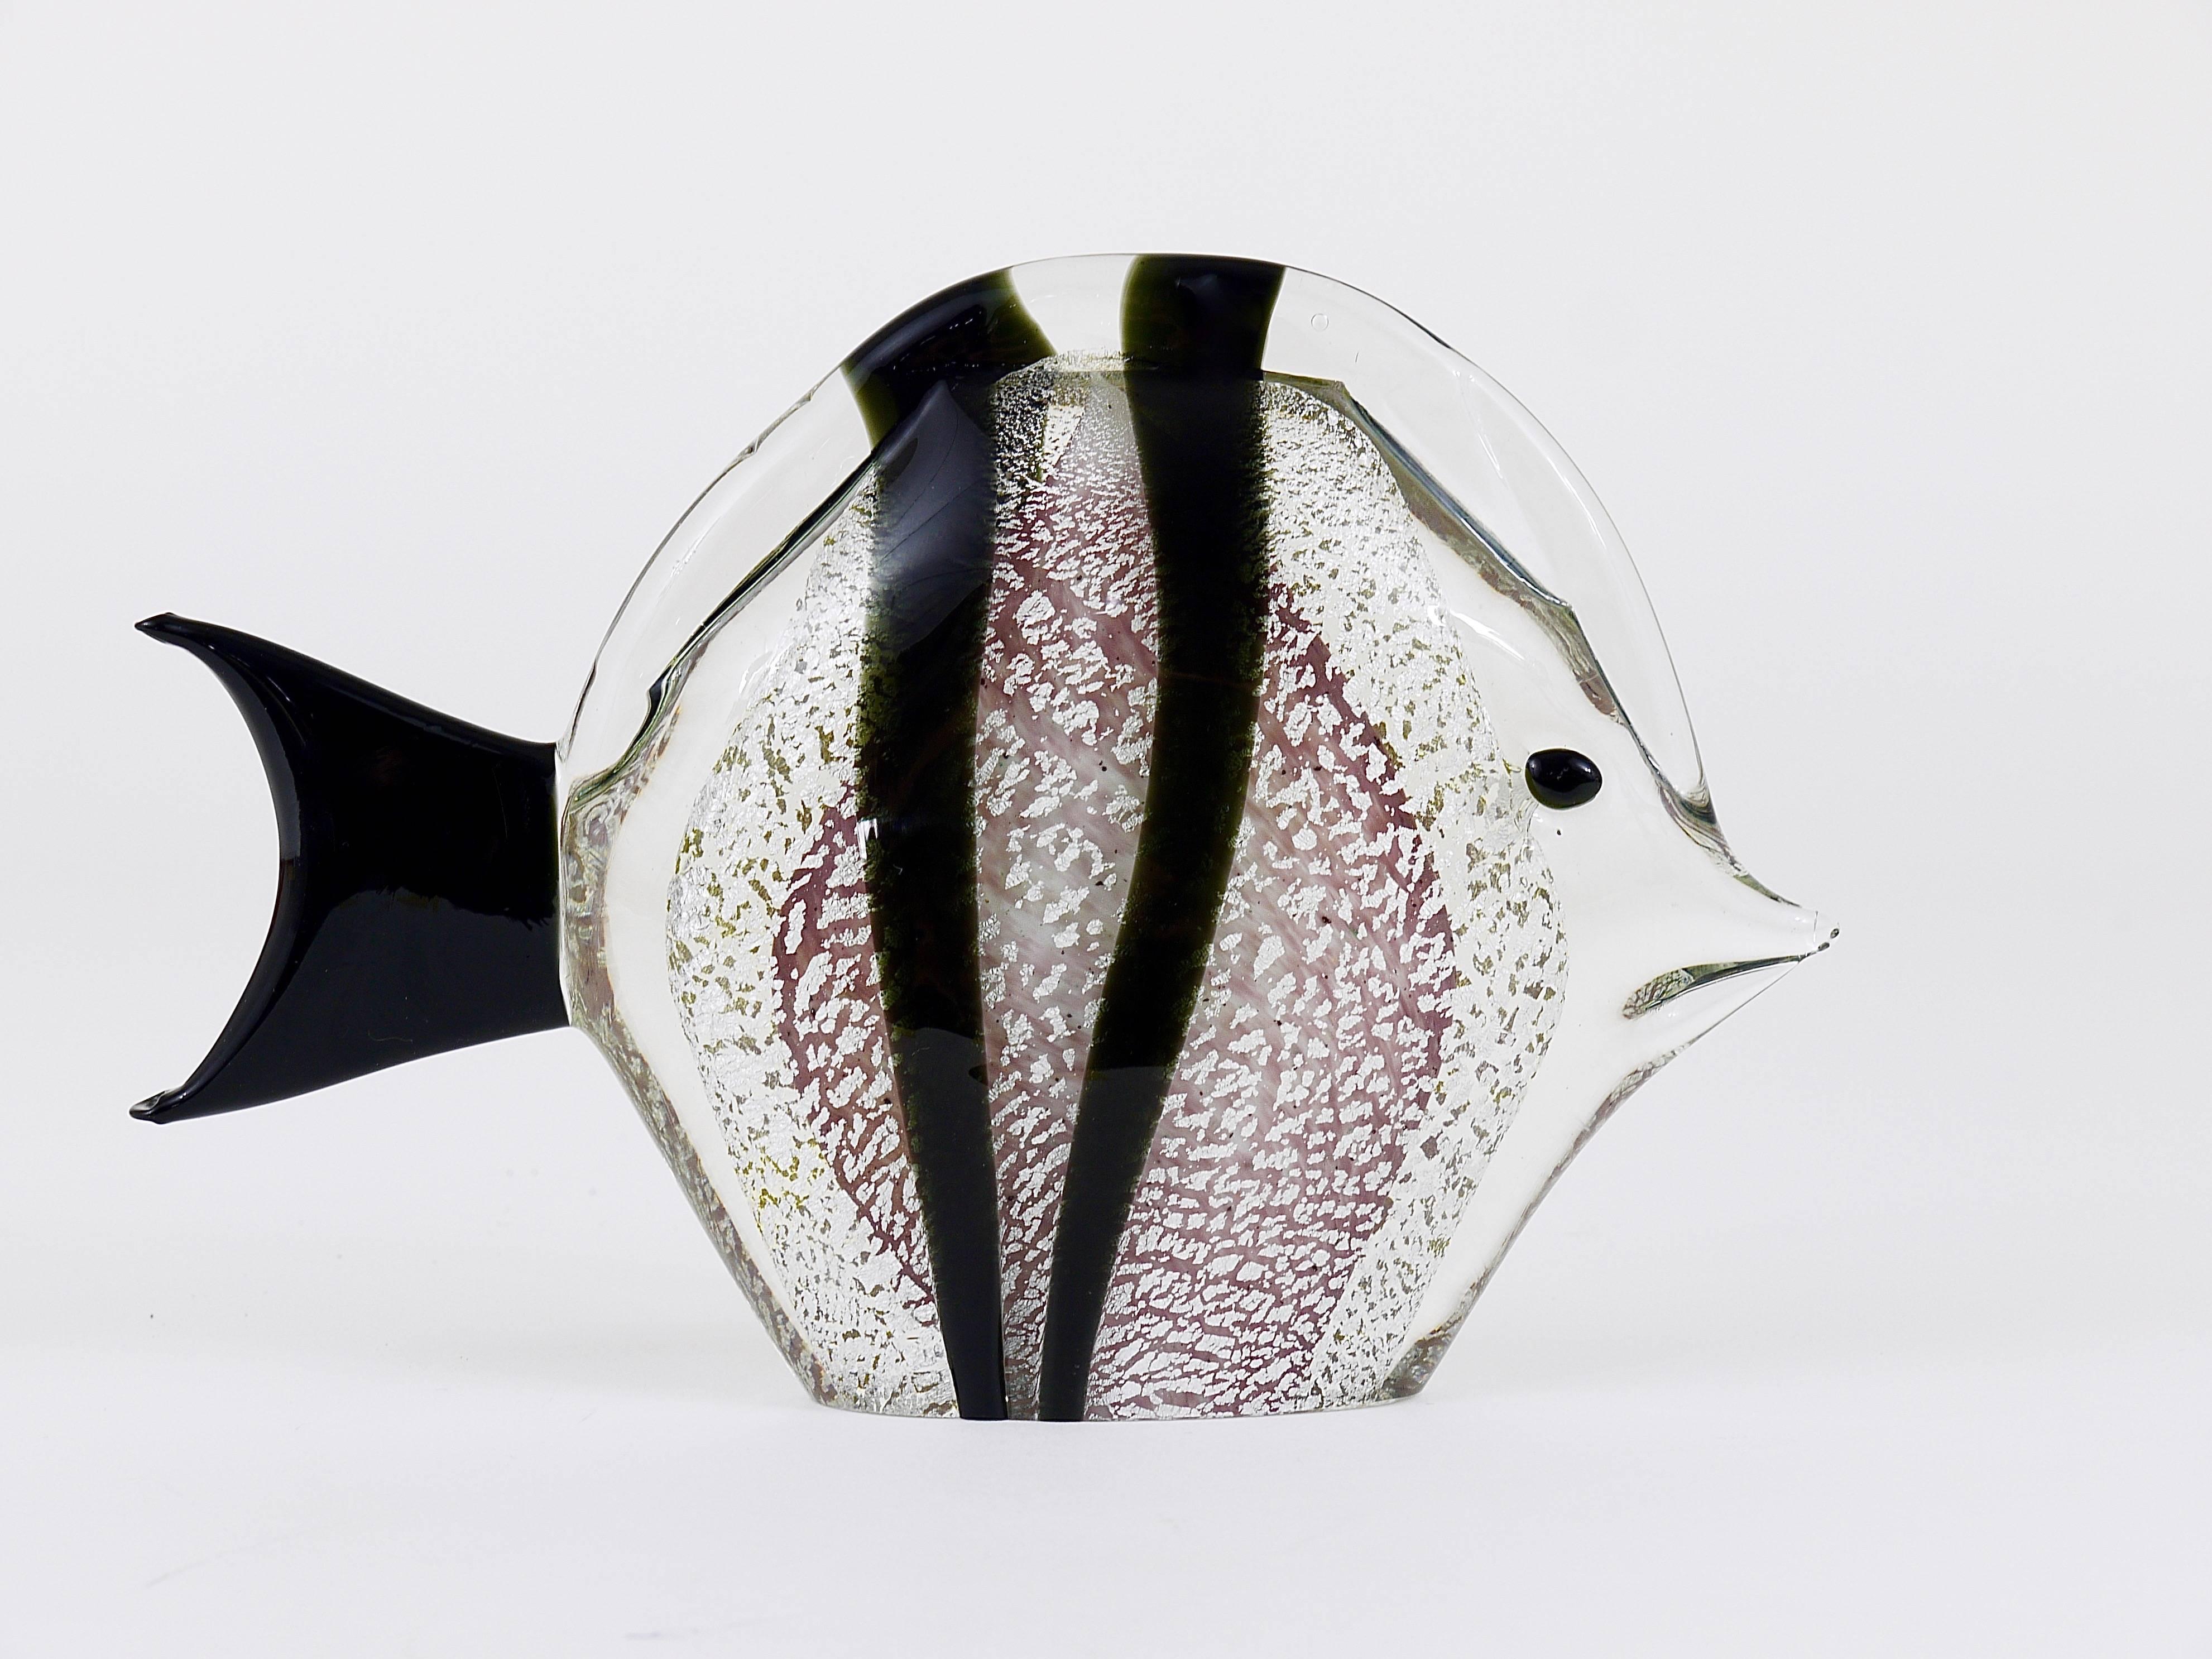 A beautiful handblown fish sculpture by Mario Badioli from the 1970s. Made of clear, black and purple Murano glass with silver flakes. In excellent condition, signed on its underneath.